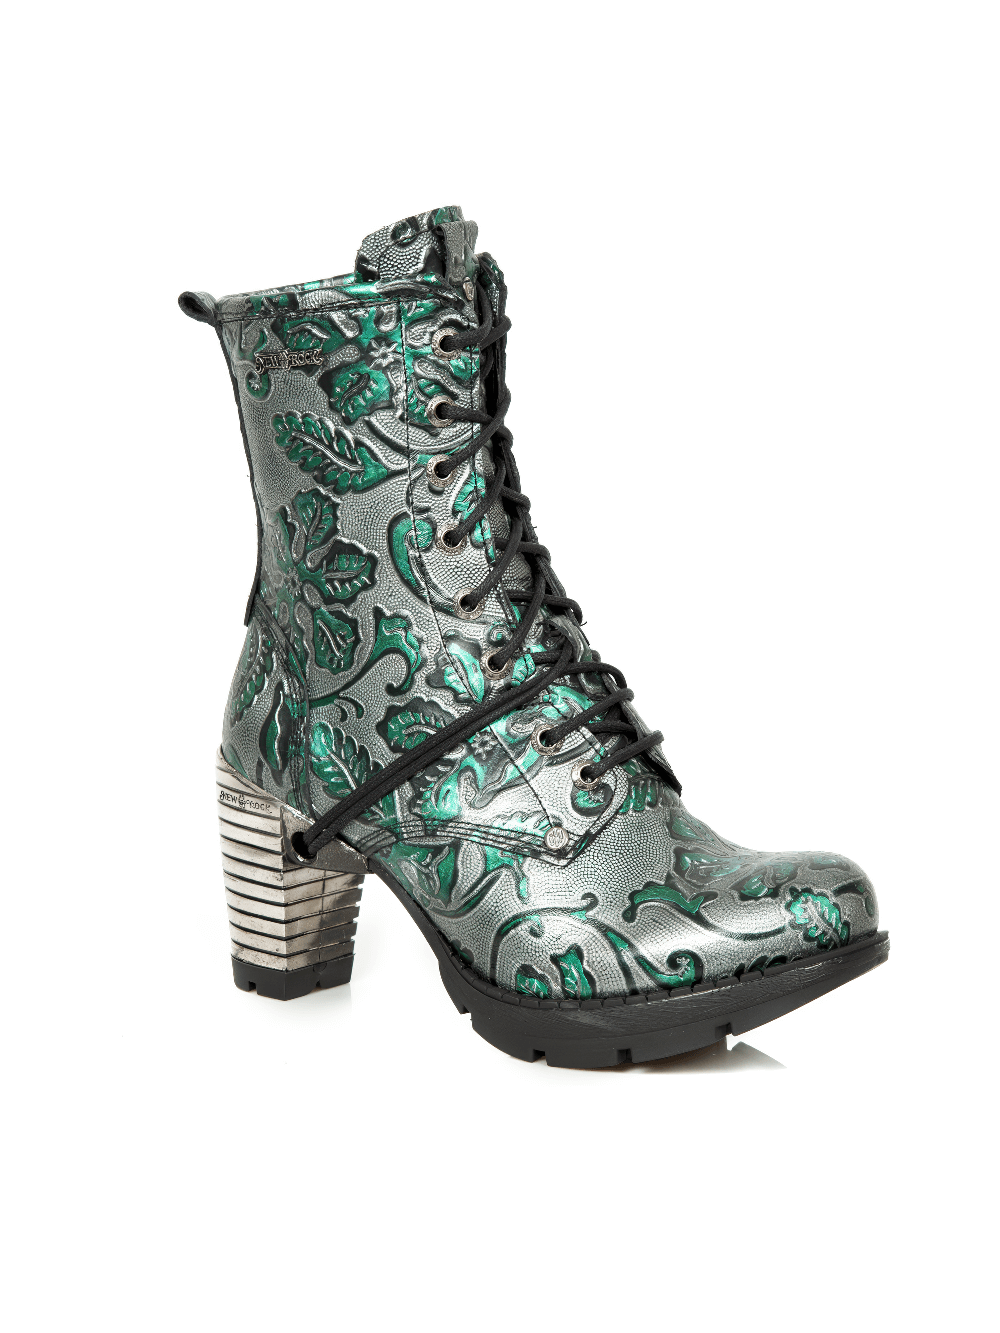 NEW ROCK Women's Embossed Leaf Pattern Lace-Up Ankle Boots